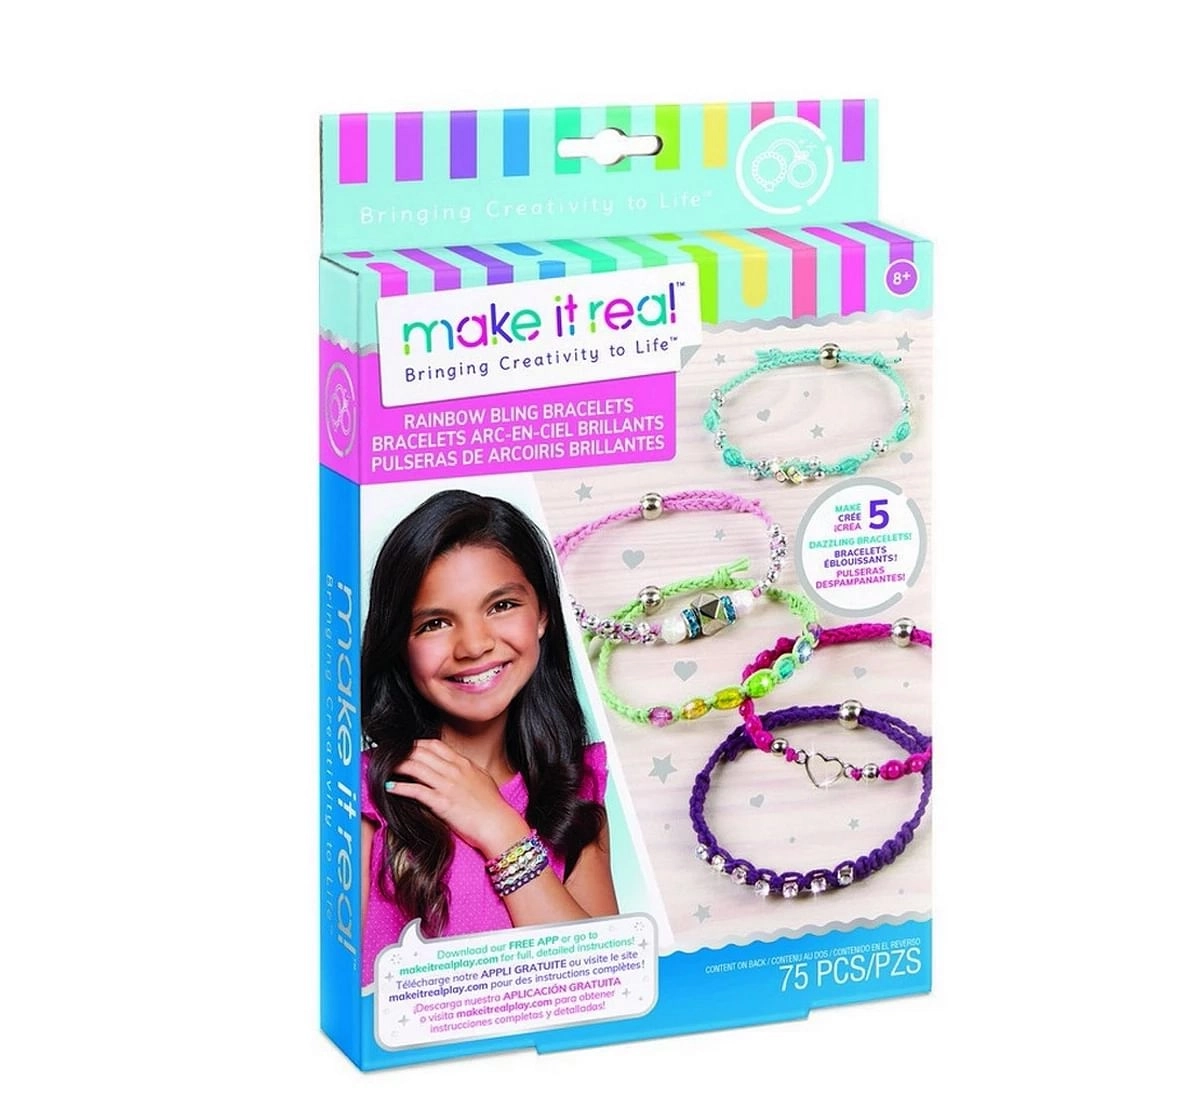 Make It Real Rainbow Bling Bracelets Do it Yourself Kit for kids 8Y+, Multicolor